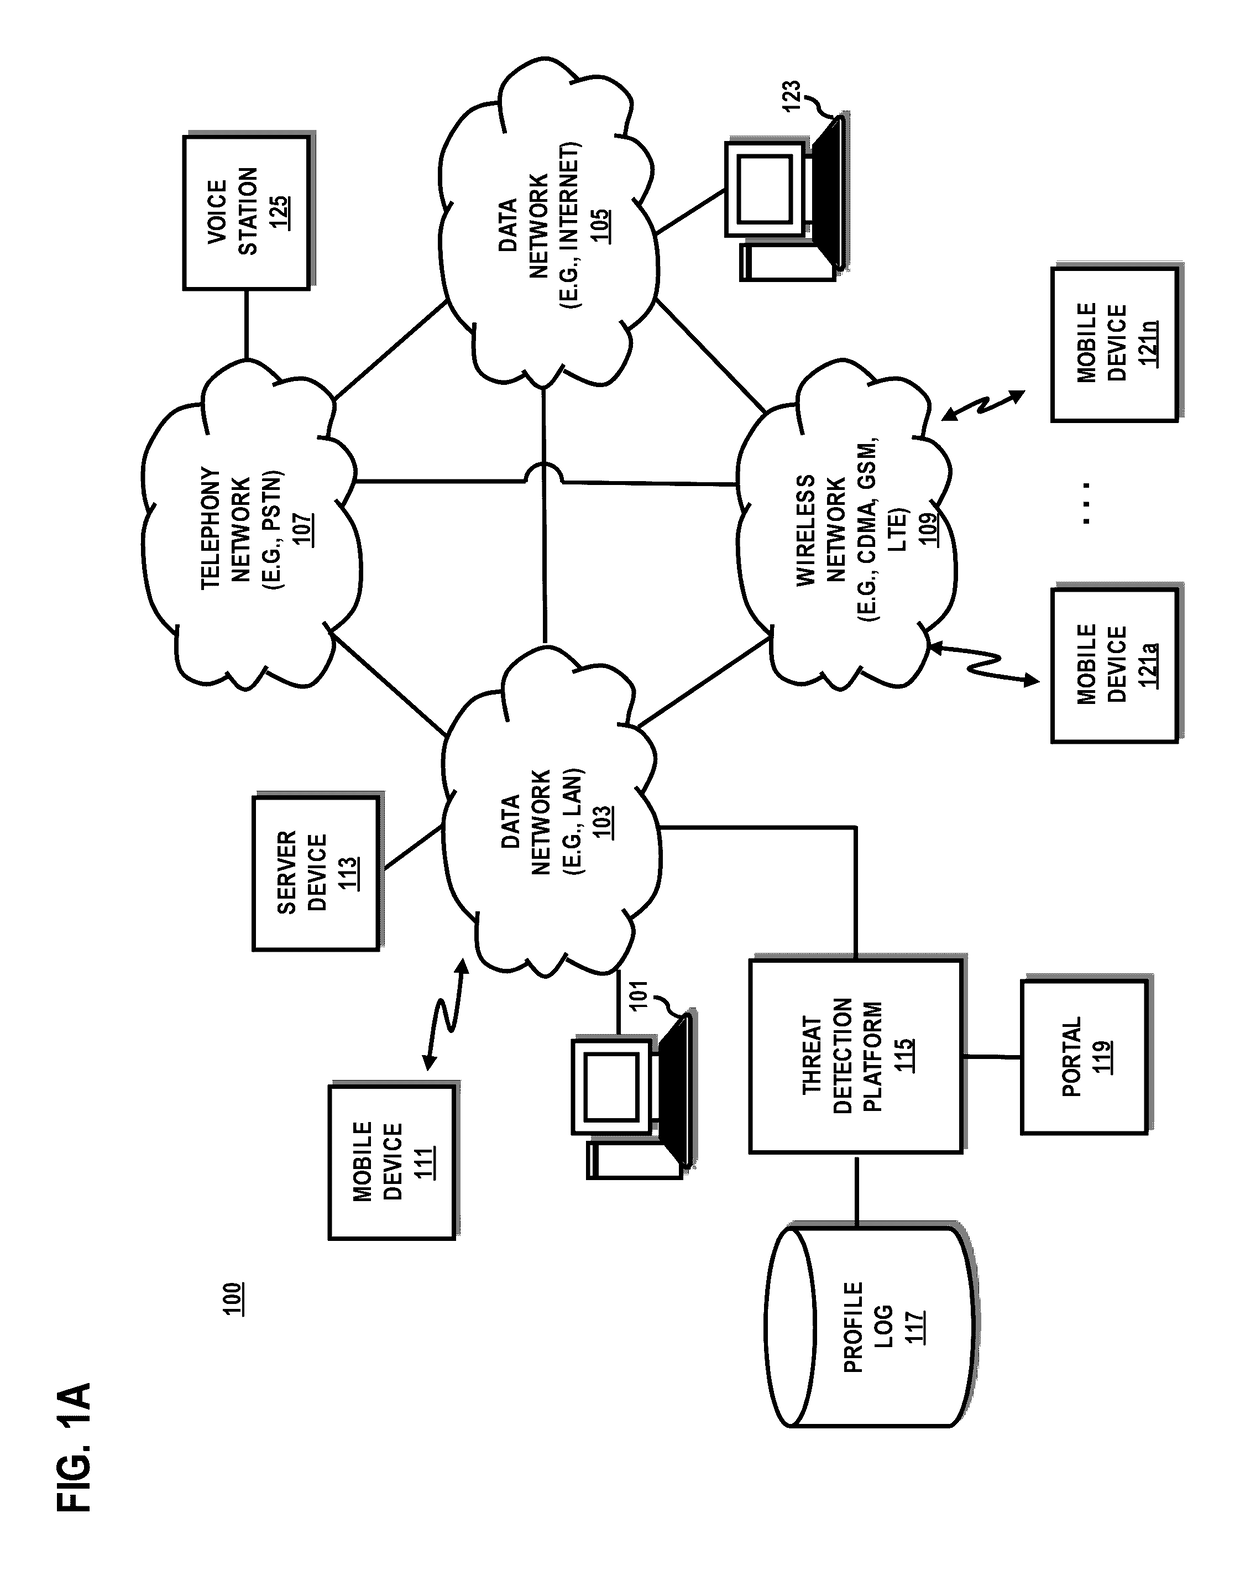 System and method for detecting insider threats